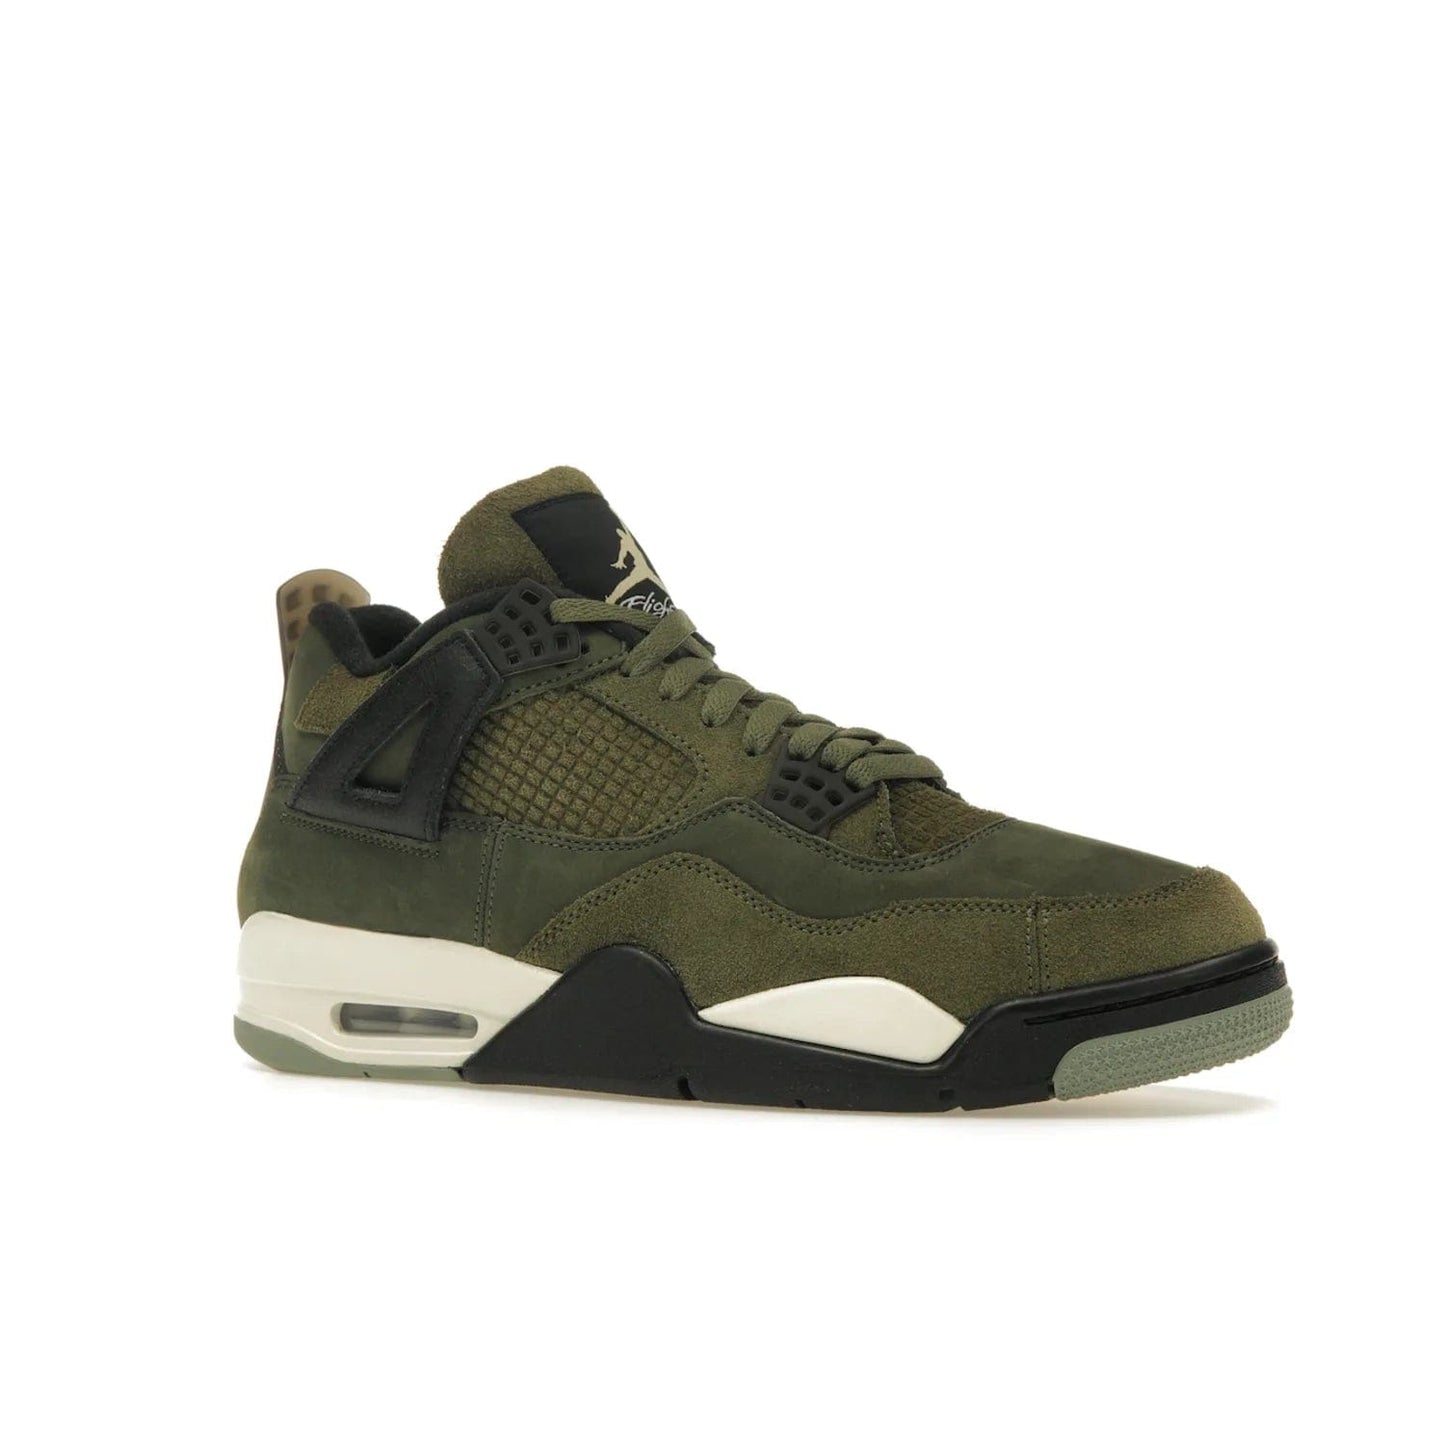 Jordan 4 Retro SE Craft Medium Olive - Image 4 - Only at www.BallersClubKickz.com - Grab the Jordan 4 Retro SE Crafts for a unique style. Combines Medium Olive, Pale Vanilla, Khaki, Black and Sail, with same classic shape, cushioning, and rubber outsole. Available on November 18th!